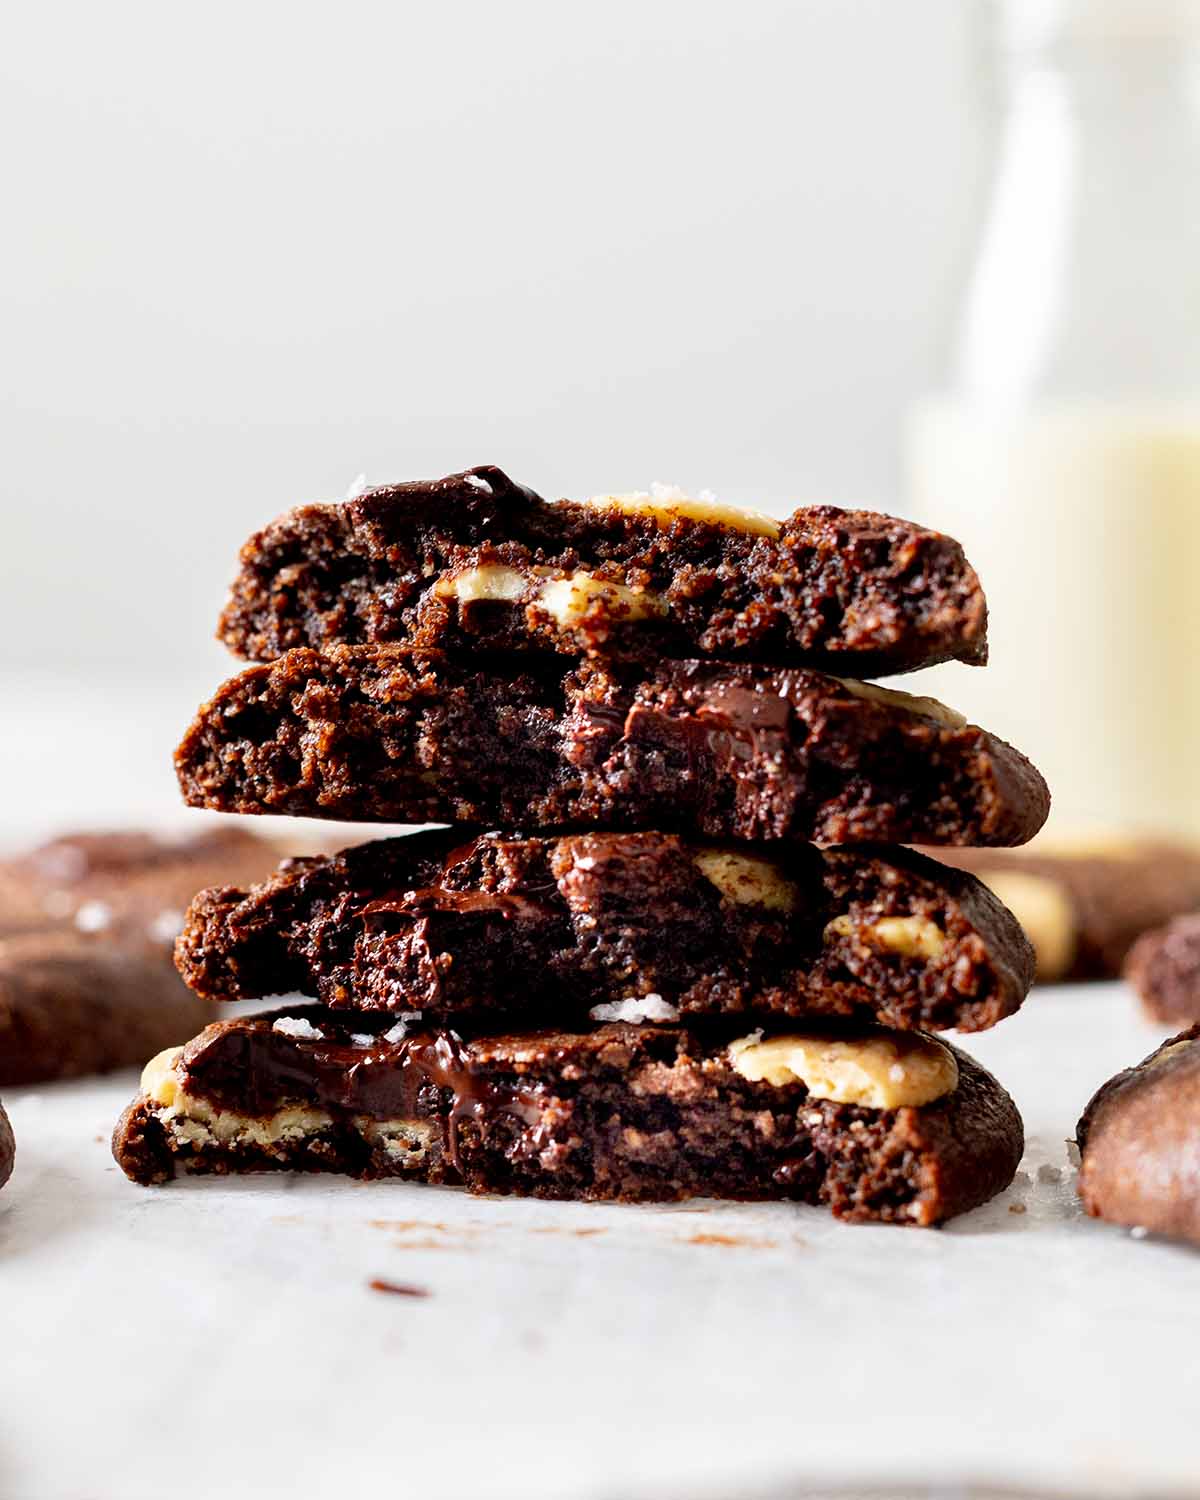 Stack of chocolate cookies showing fudgy interior and melty chocolate chunks and chips.